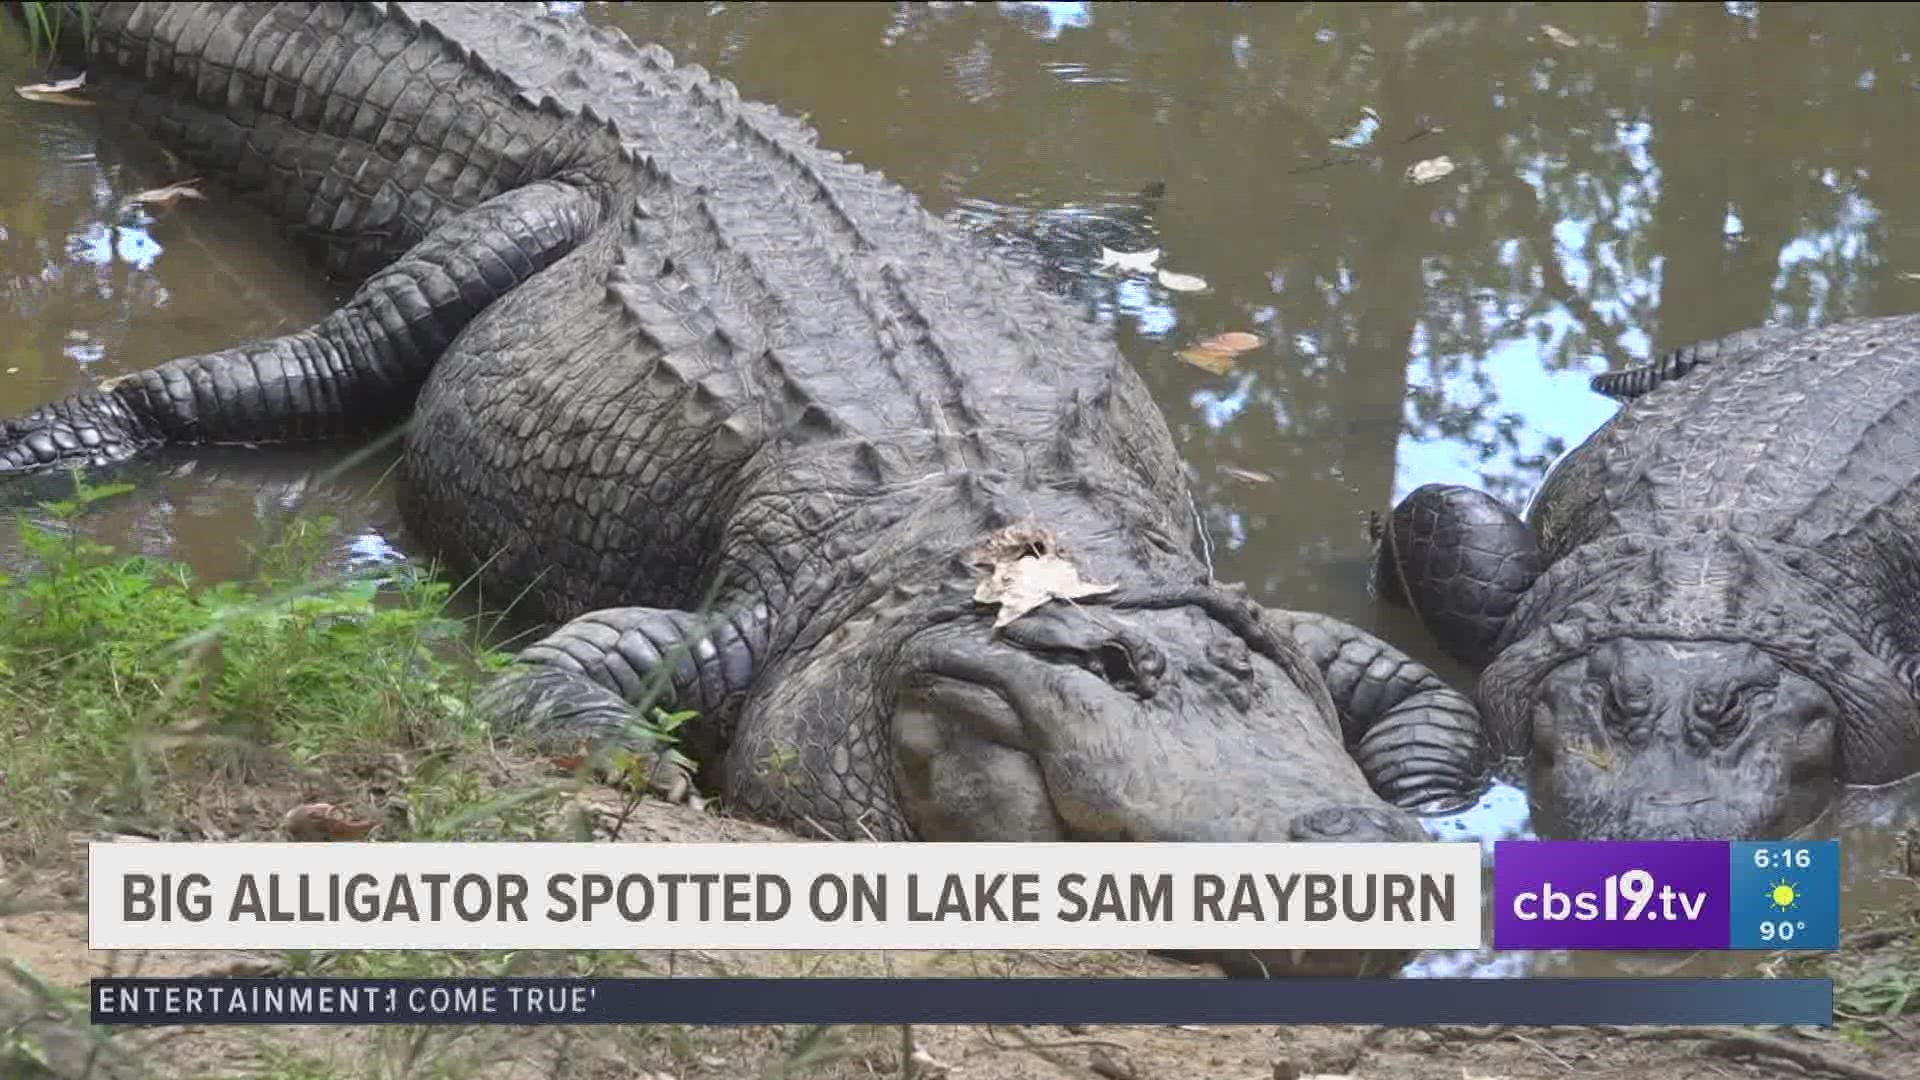 A photo of a massive alligator along the banks of an East Texas lake is getting a lot of attention online.